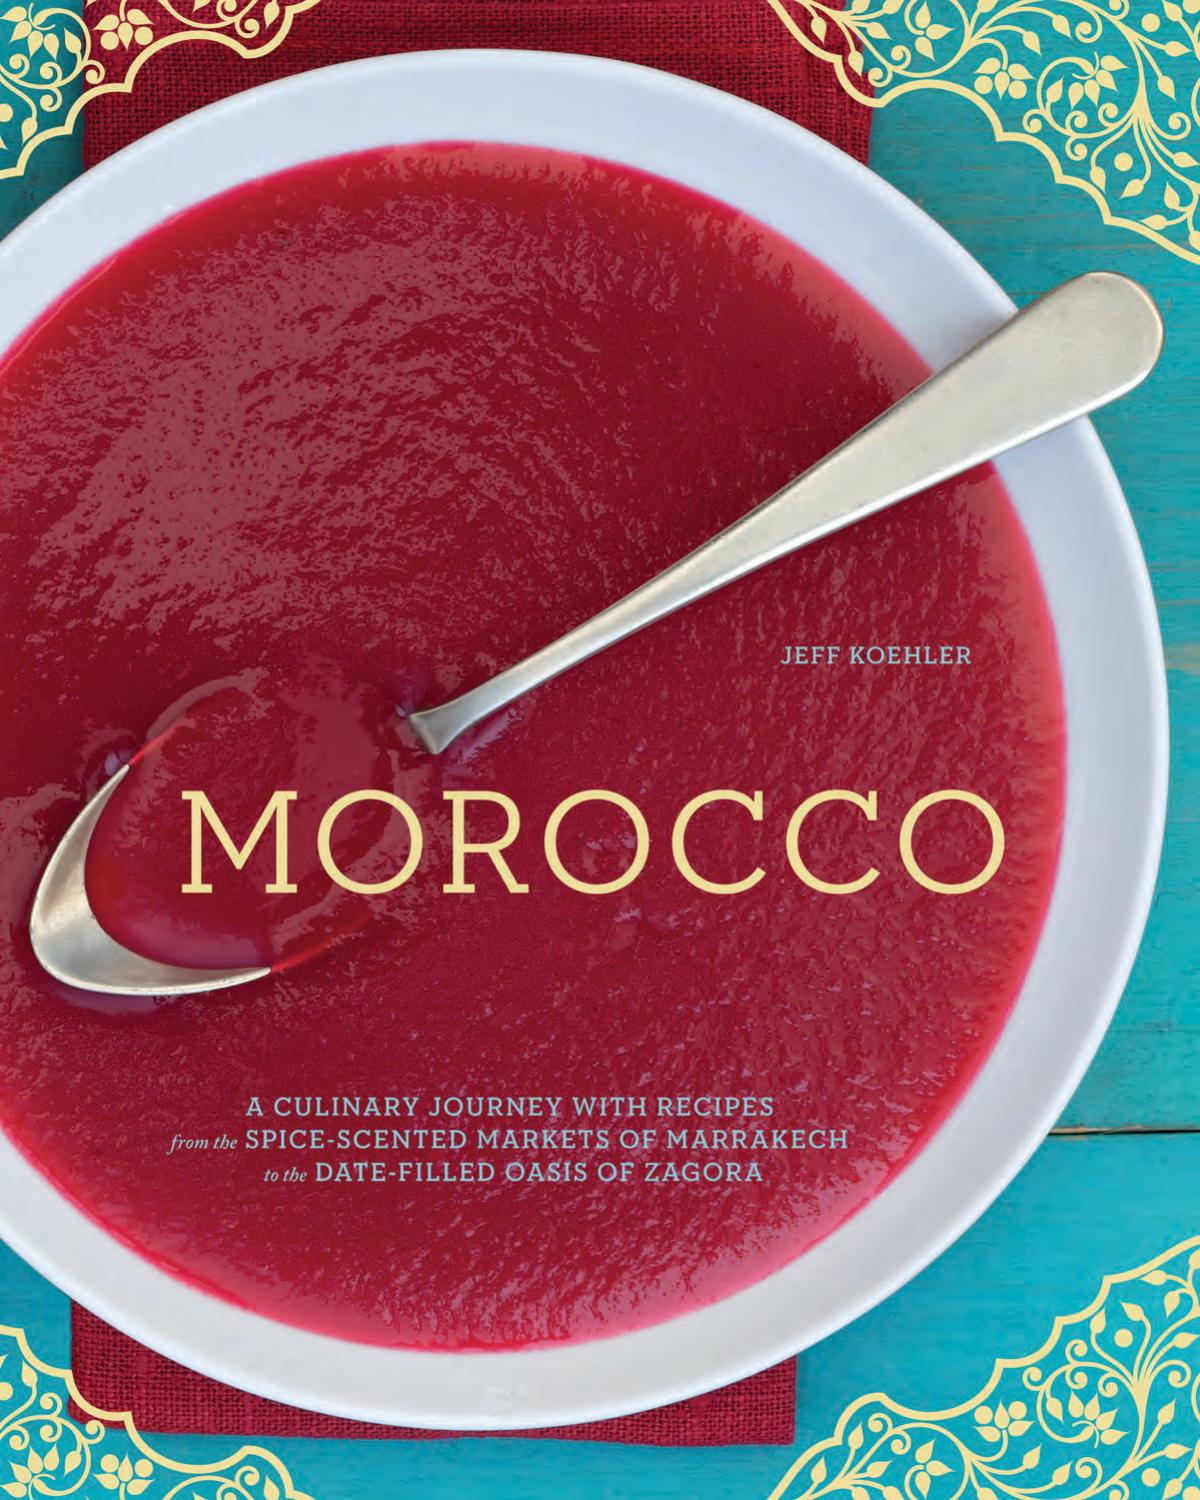 Morocco: A Culinary Journey with Recipes by Jeff Koehler